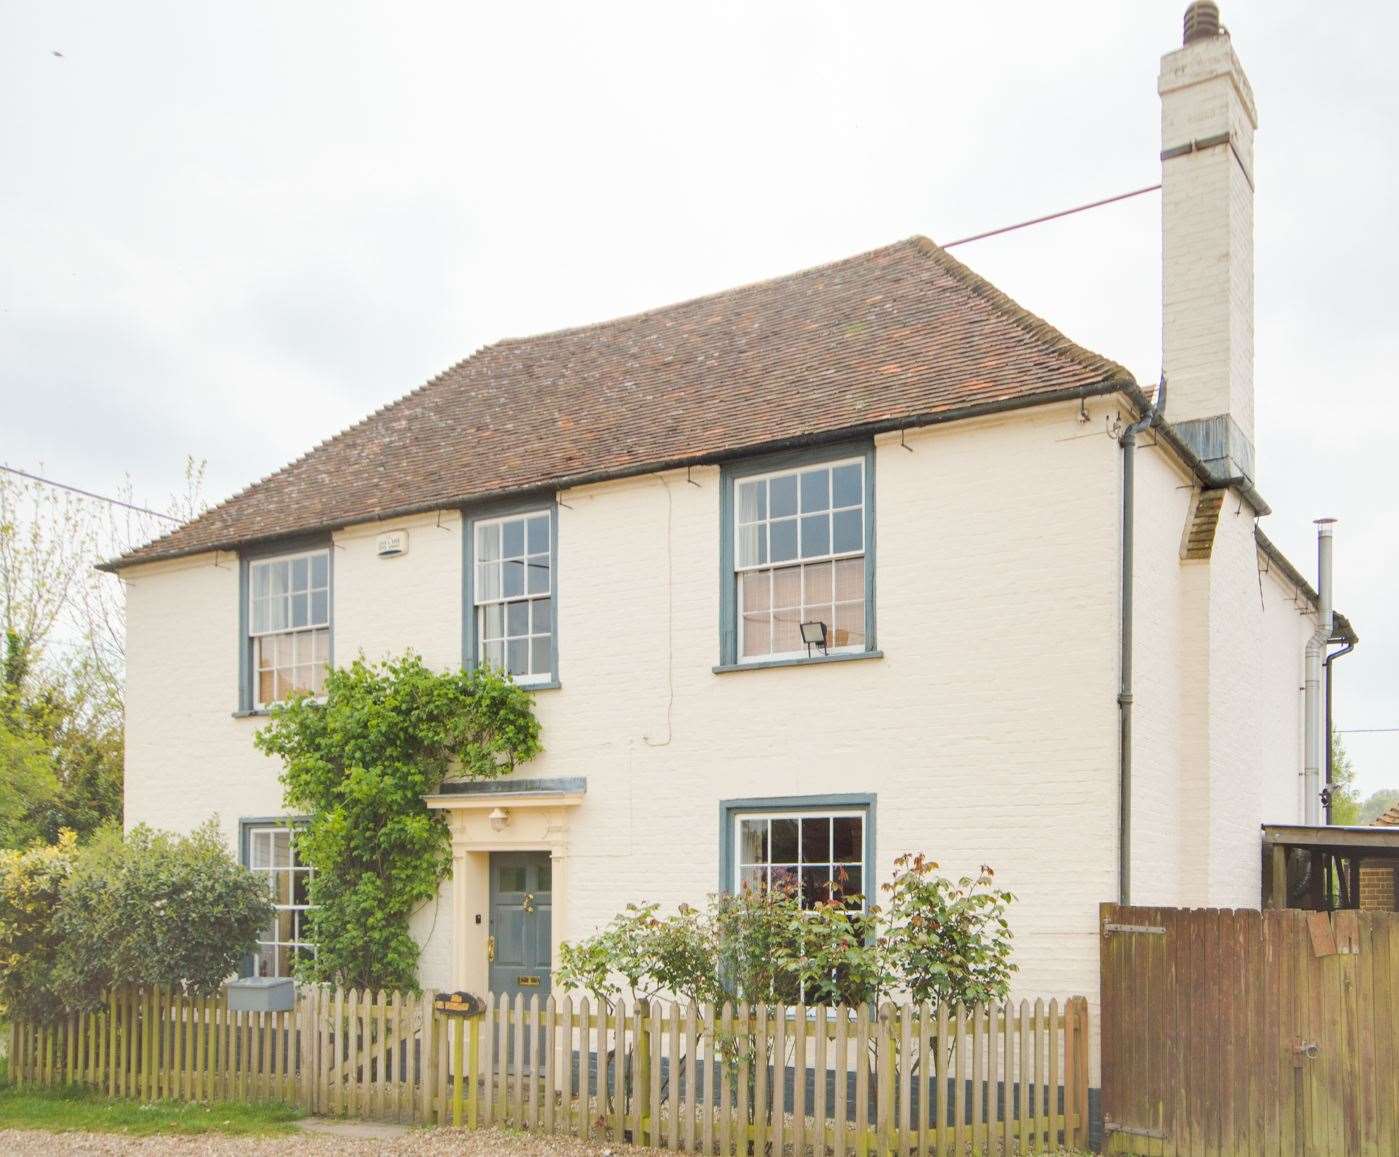 The Old Windmill Inn is now a four-bedroom home